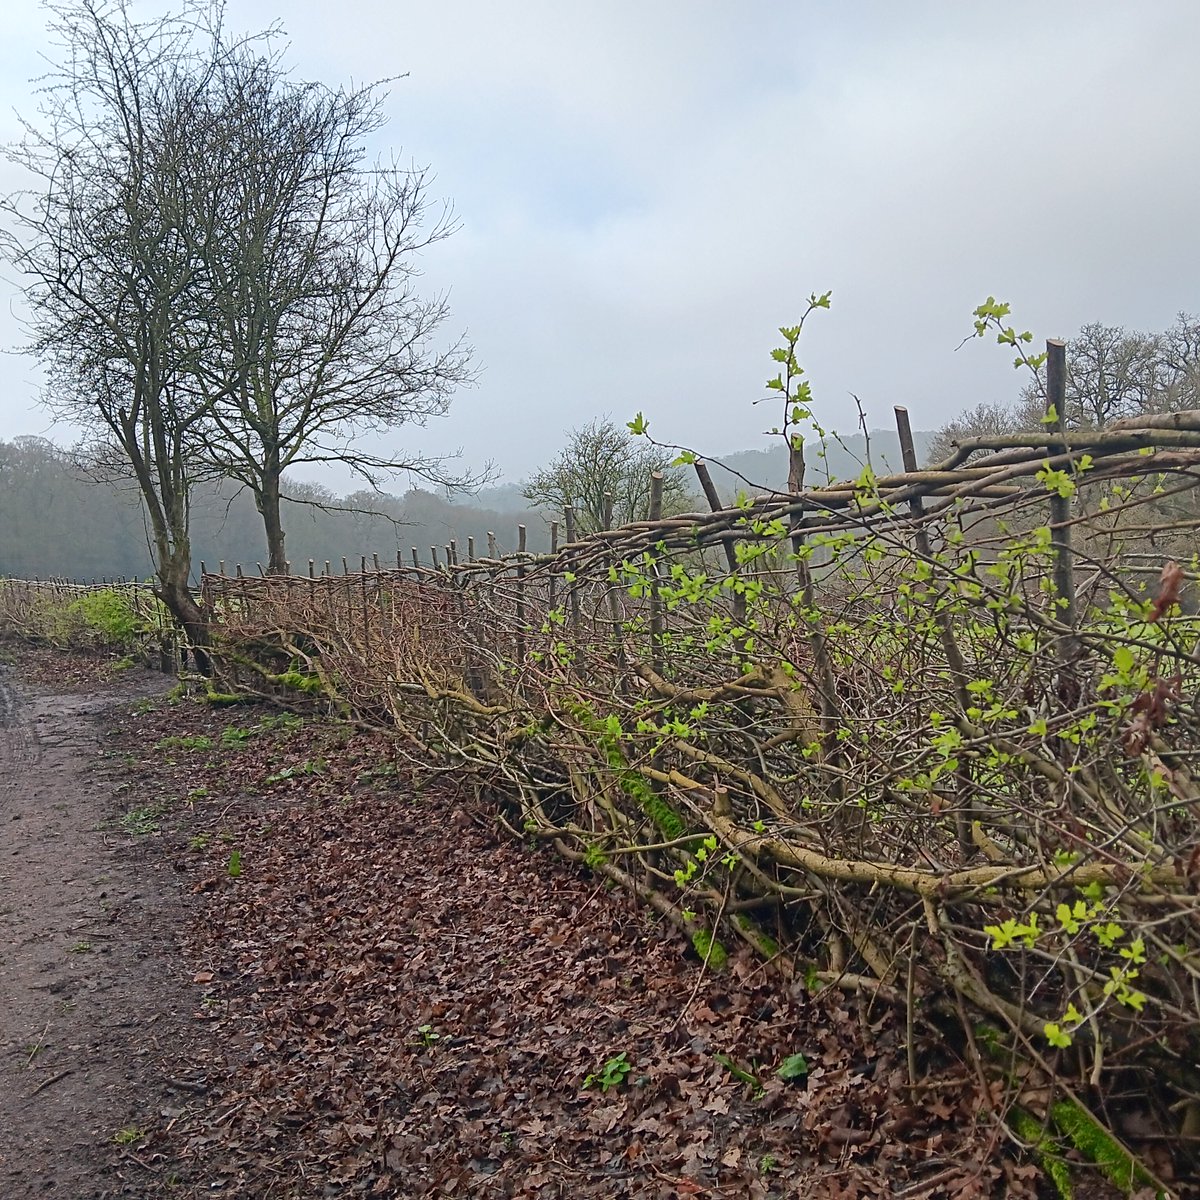 What a thing of beauty! This newly laid hedge at Birch Hall Field #EppingForest was carried out by the highly skilled volunteers from Conservation Hedgelaying. This countryside skill has been practised for centuries, providing both a field barrier & haven for wildlife.